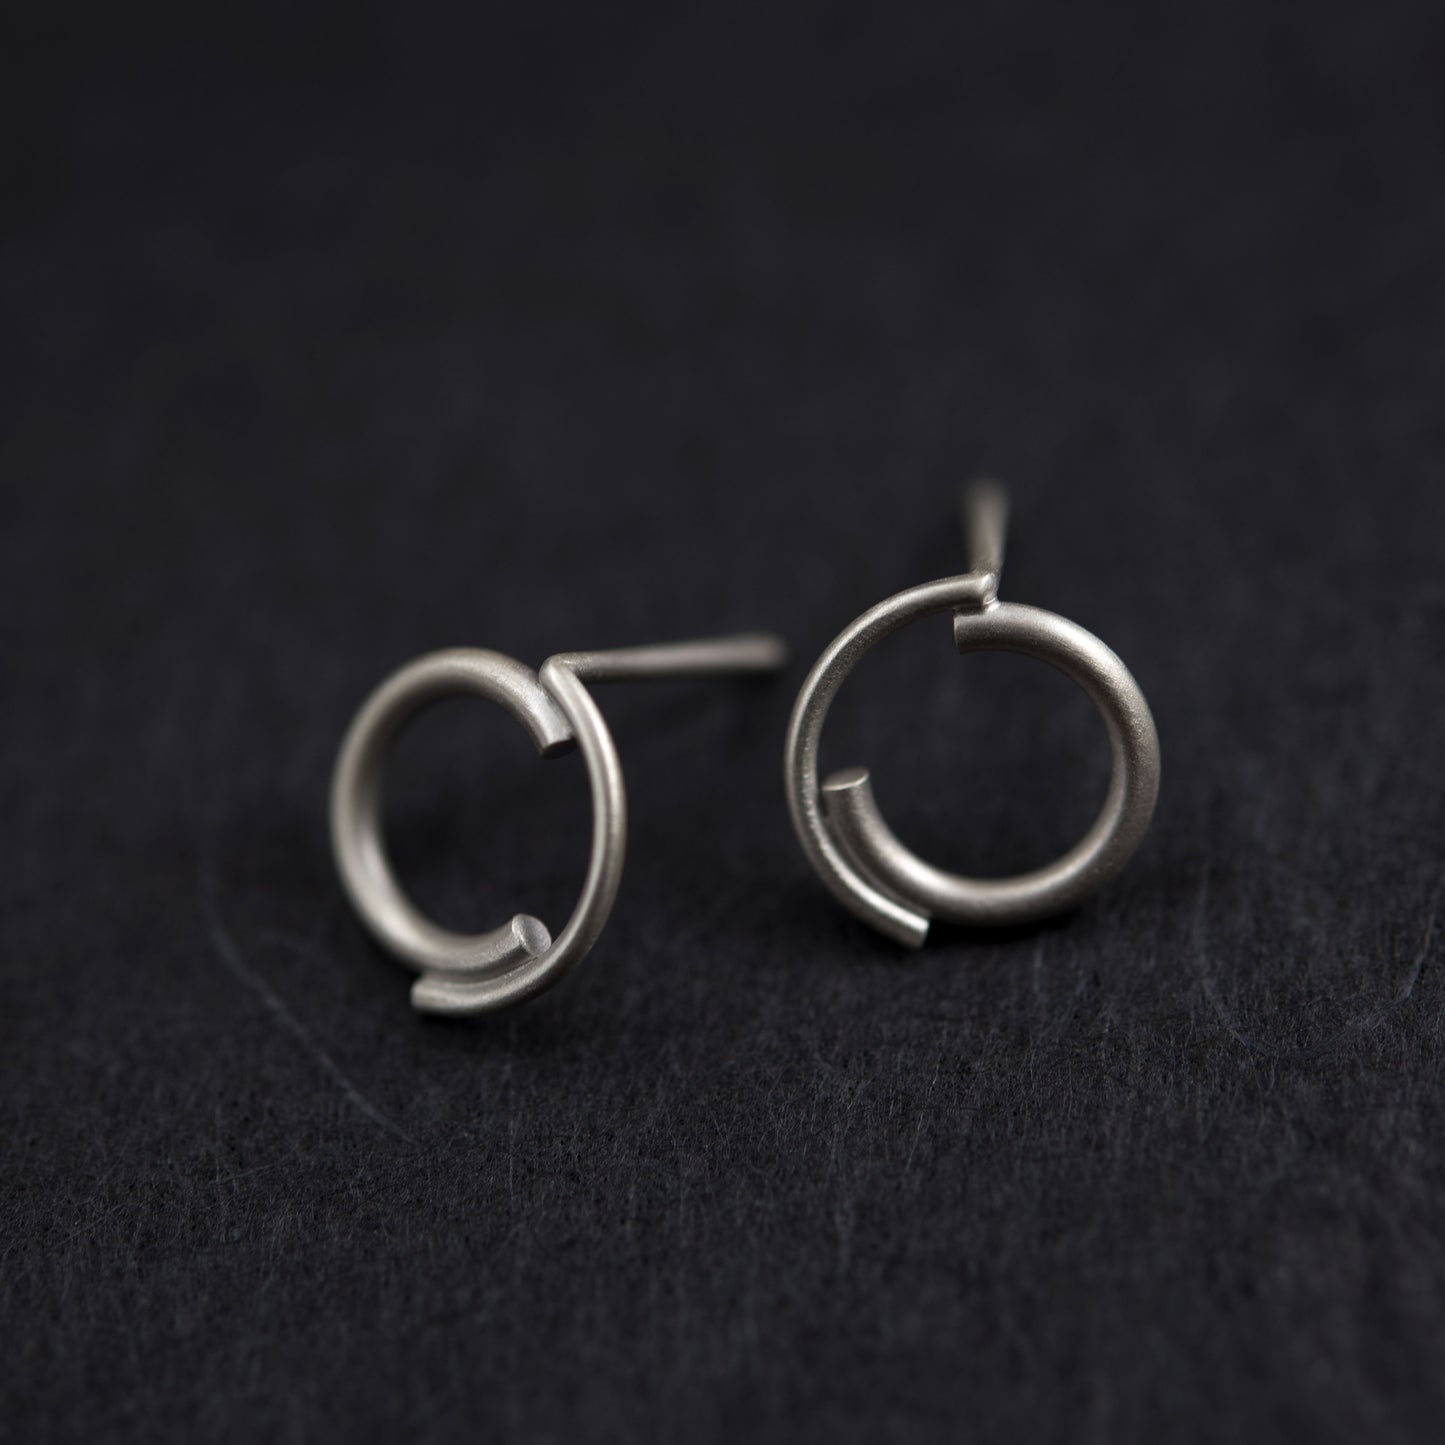 A close up of a 12 millimeters diameter concentric circle studs matte finished